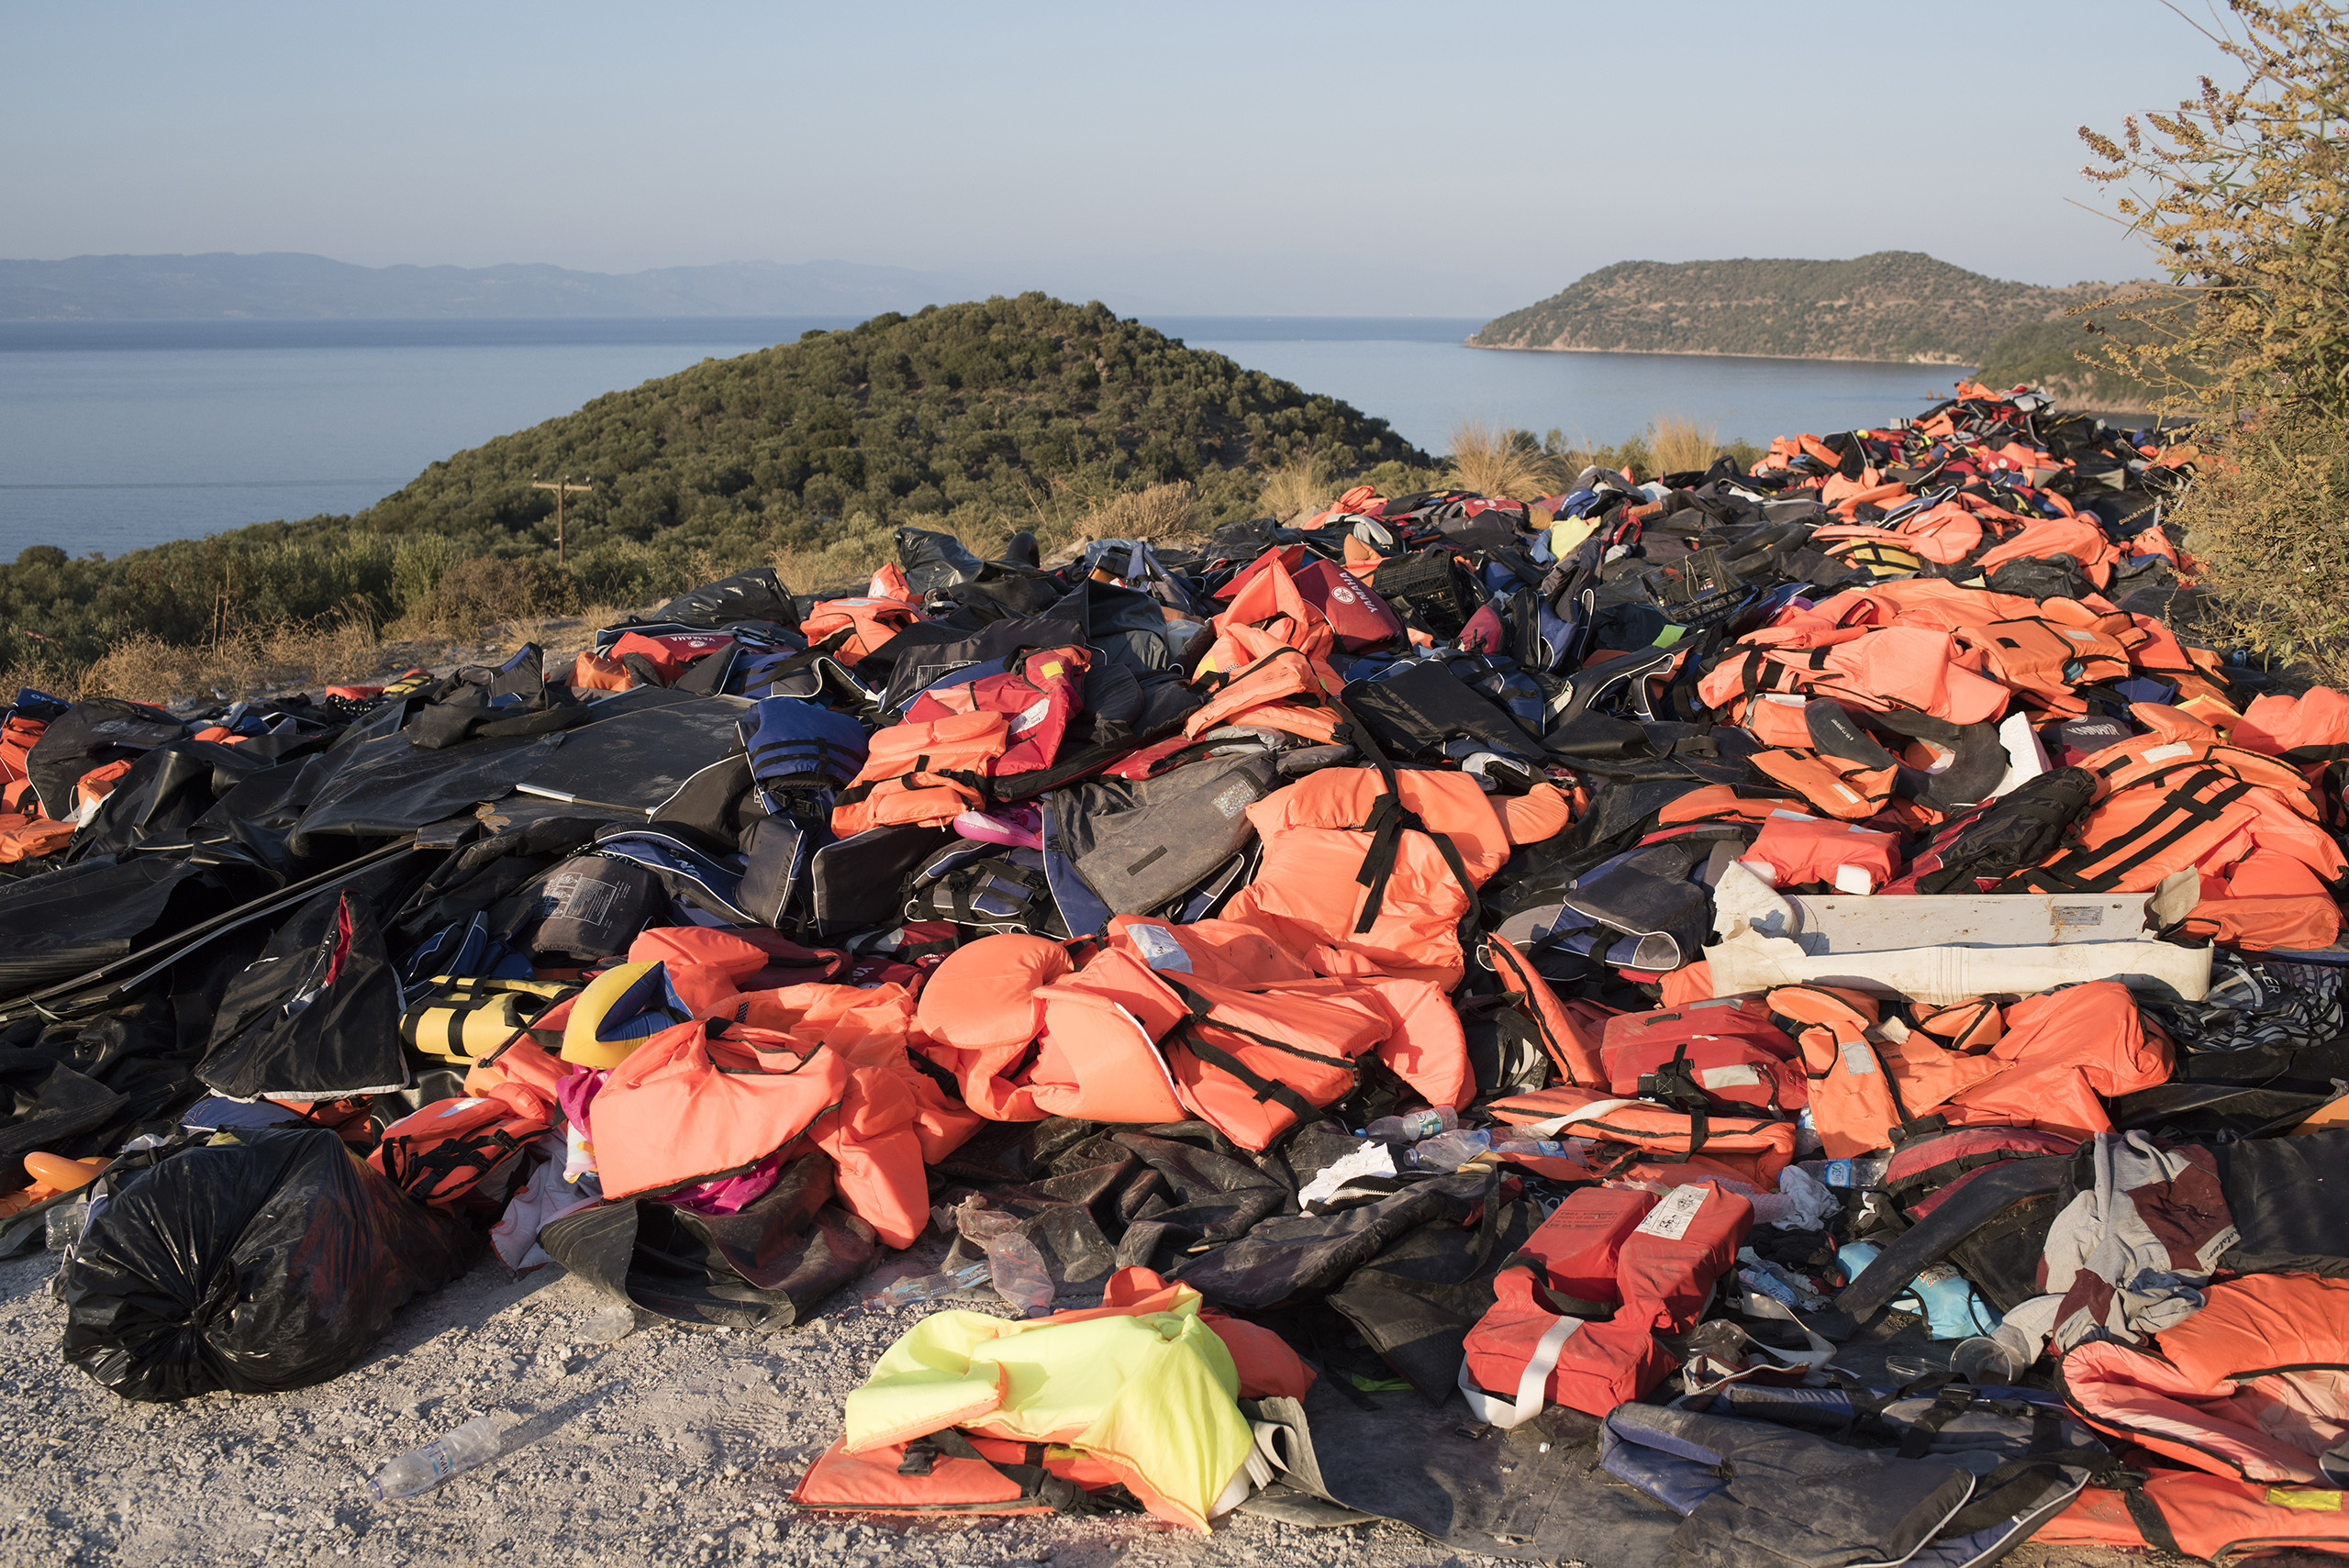 A beach  on the Greek island of Lesbos is festooned with orange life jackets and deflated rafts abandoned by migrants who are coming ashore near the village of Skala Sikamineas after navigating the 6-mile crossing from Turkey on  inflatable rafts.  Between 2,000 and 3,500 migrants now reach the island daily, riding on about 100 inflatable rafts. Sept., 2015.From <a href="http://time.com/4047547/europe-refugees-migrants-yuri-kozyrev/">"Witness the Resilience of Thousands of Refugees on Their Way to Europe"</a> (Yuri Kozyrev—NOOR for TIME)